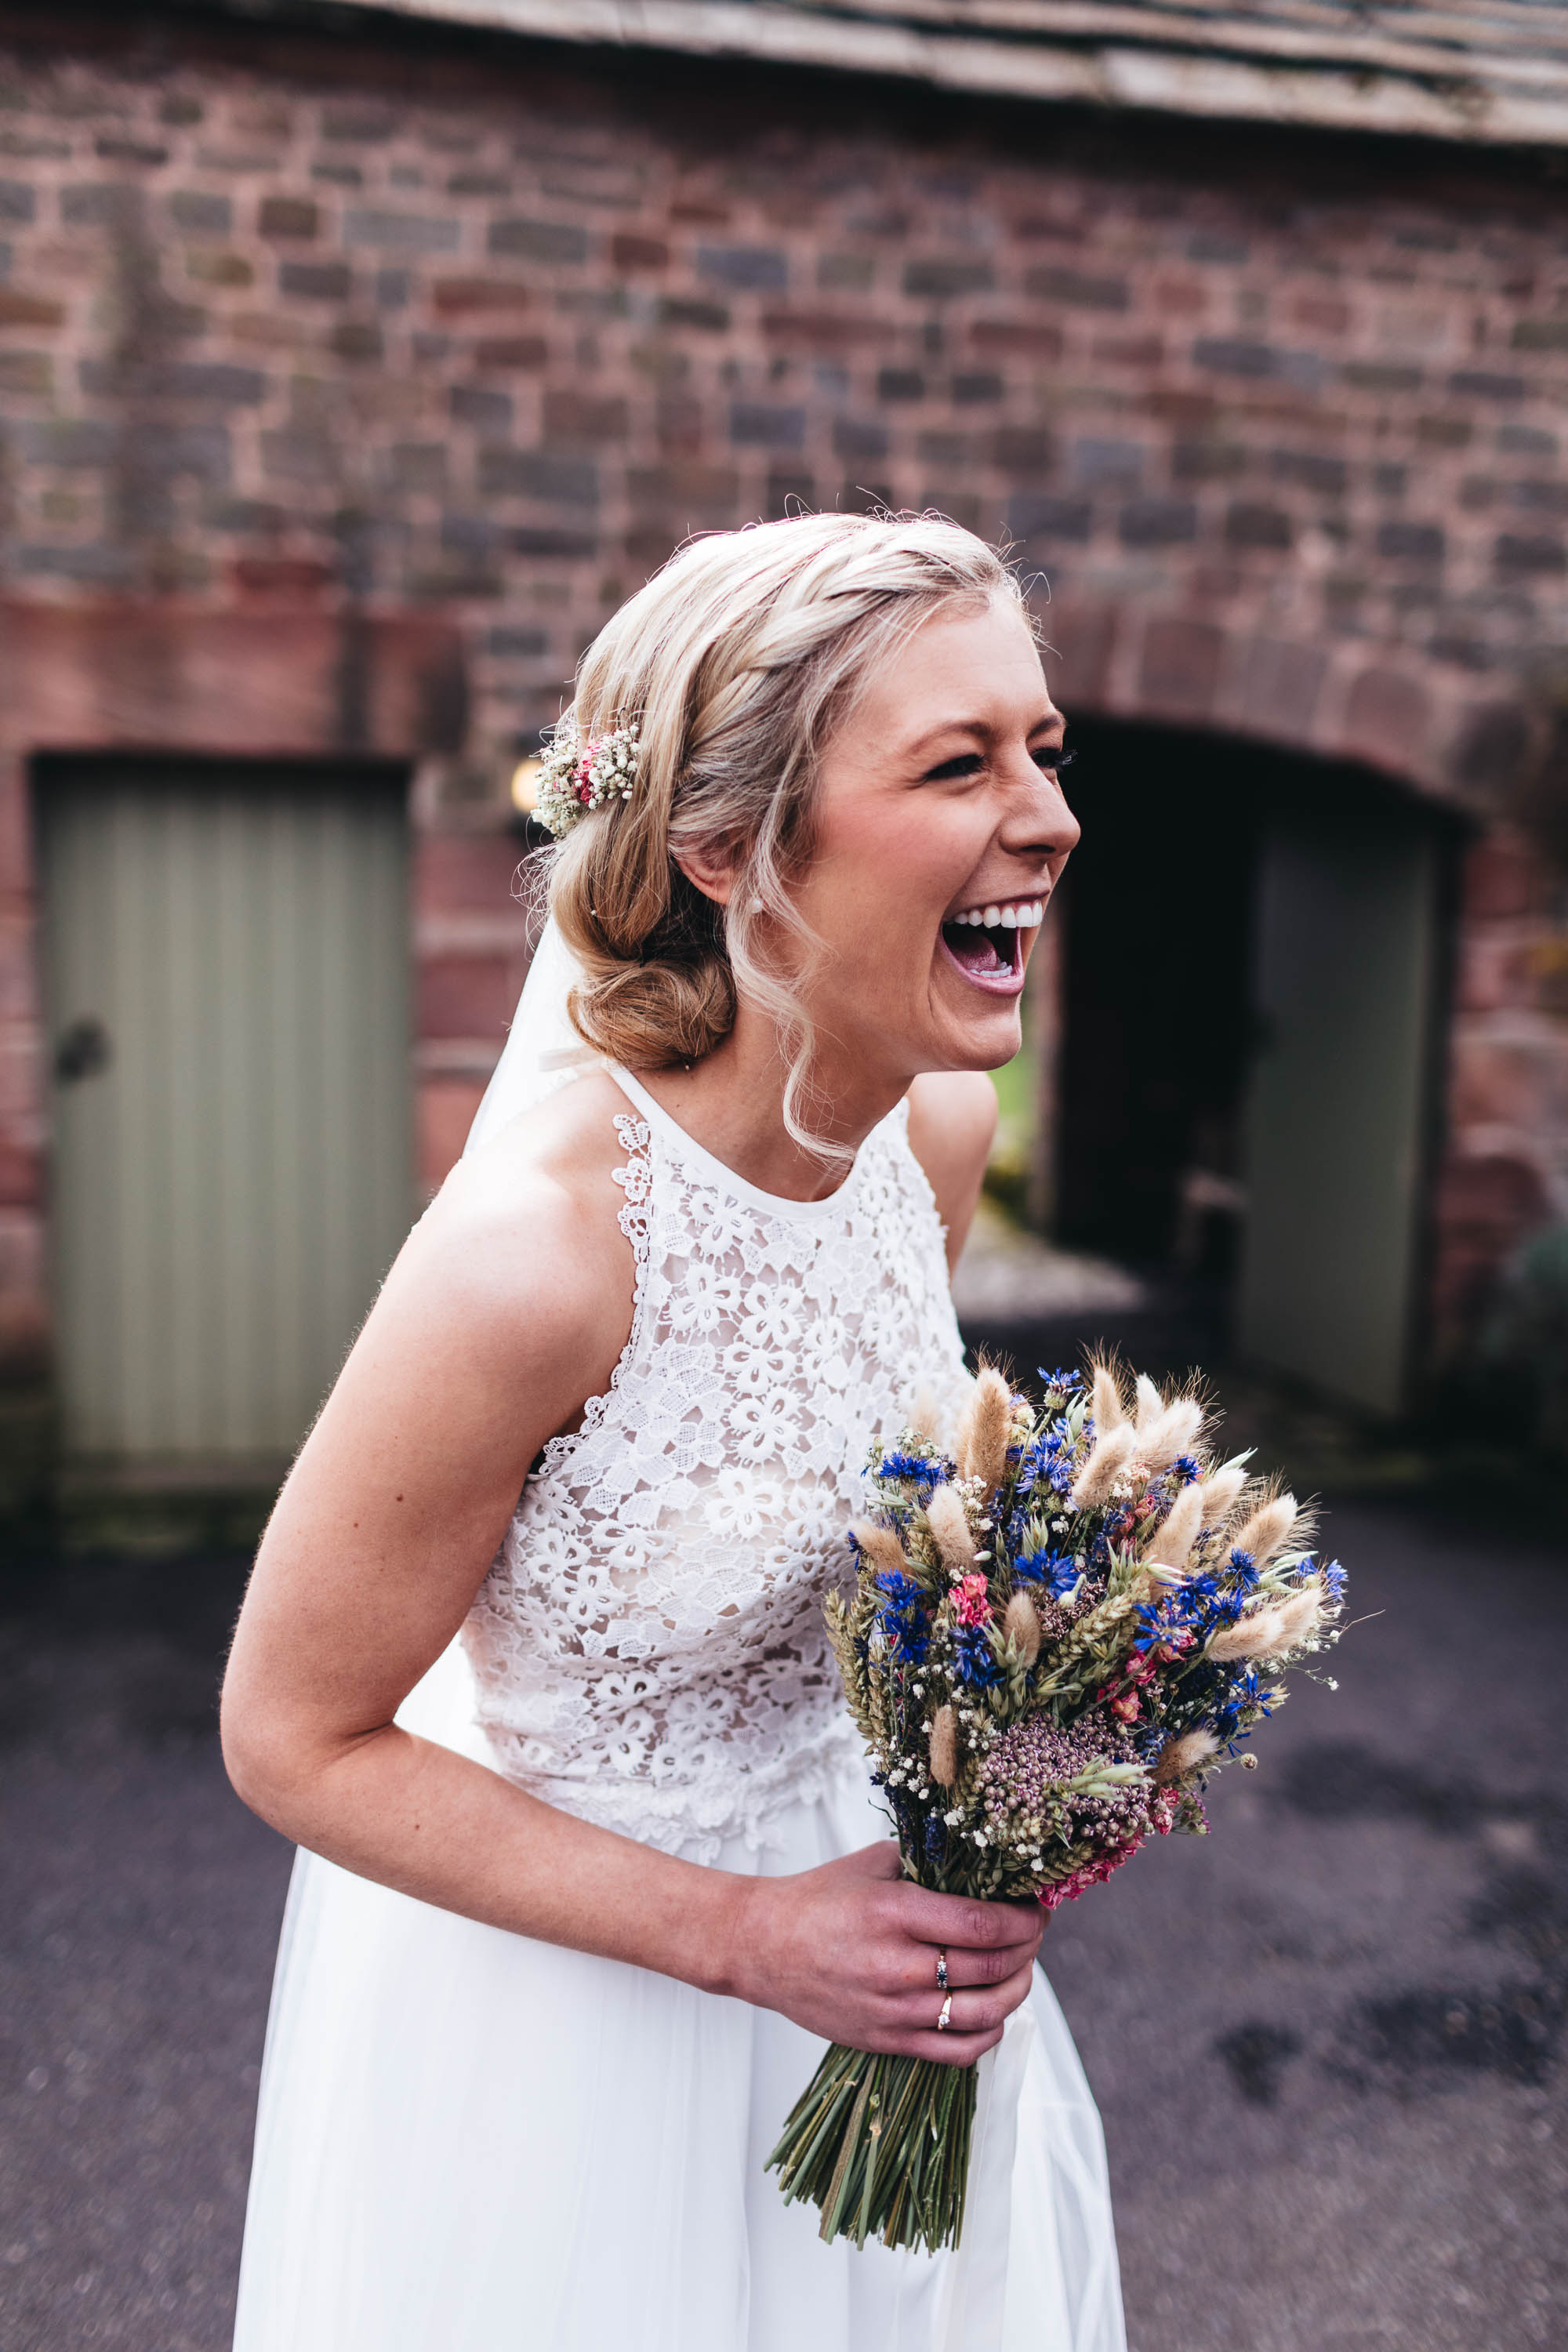 Bride laughs outside wedding barn venue holding dried flowers bouquet